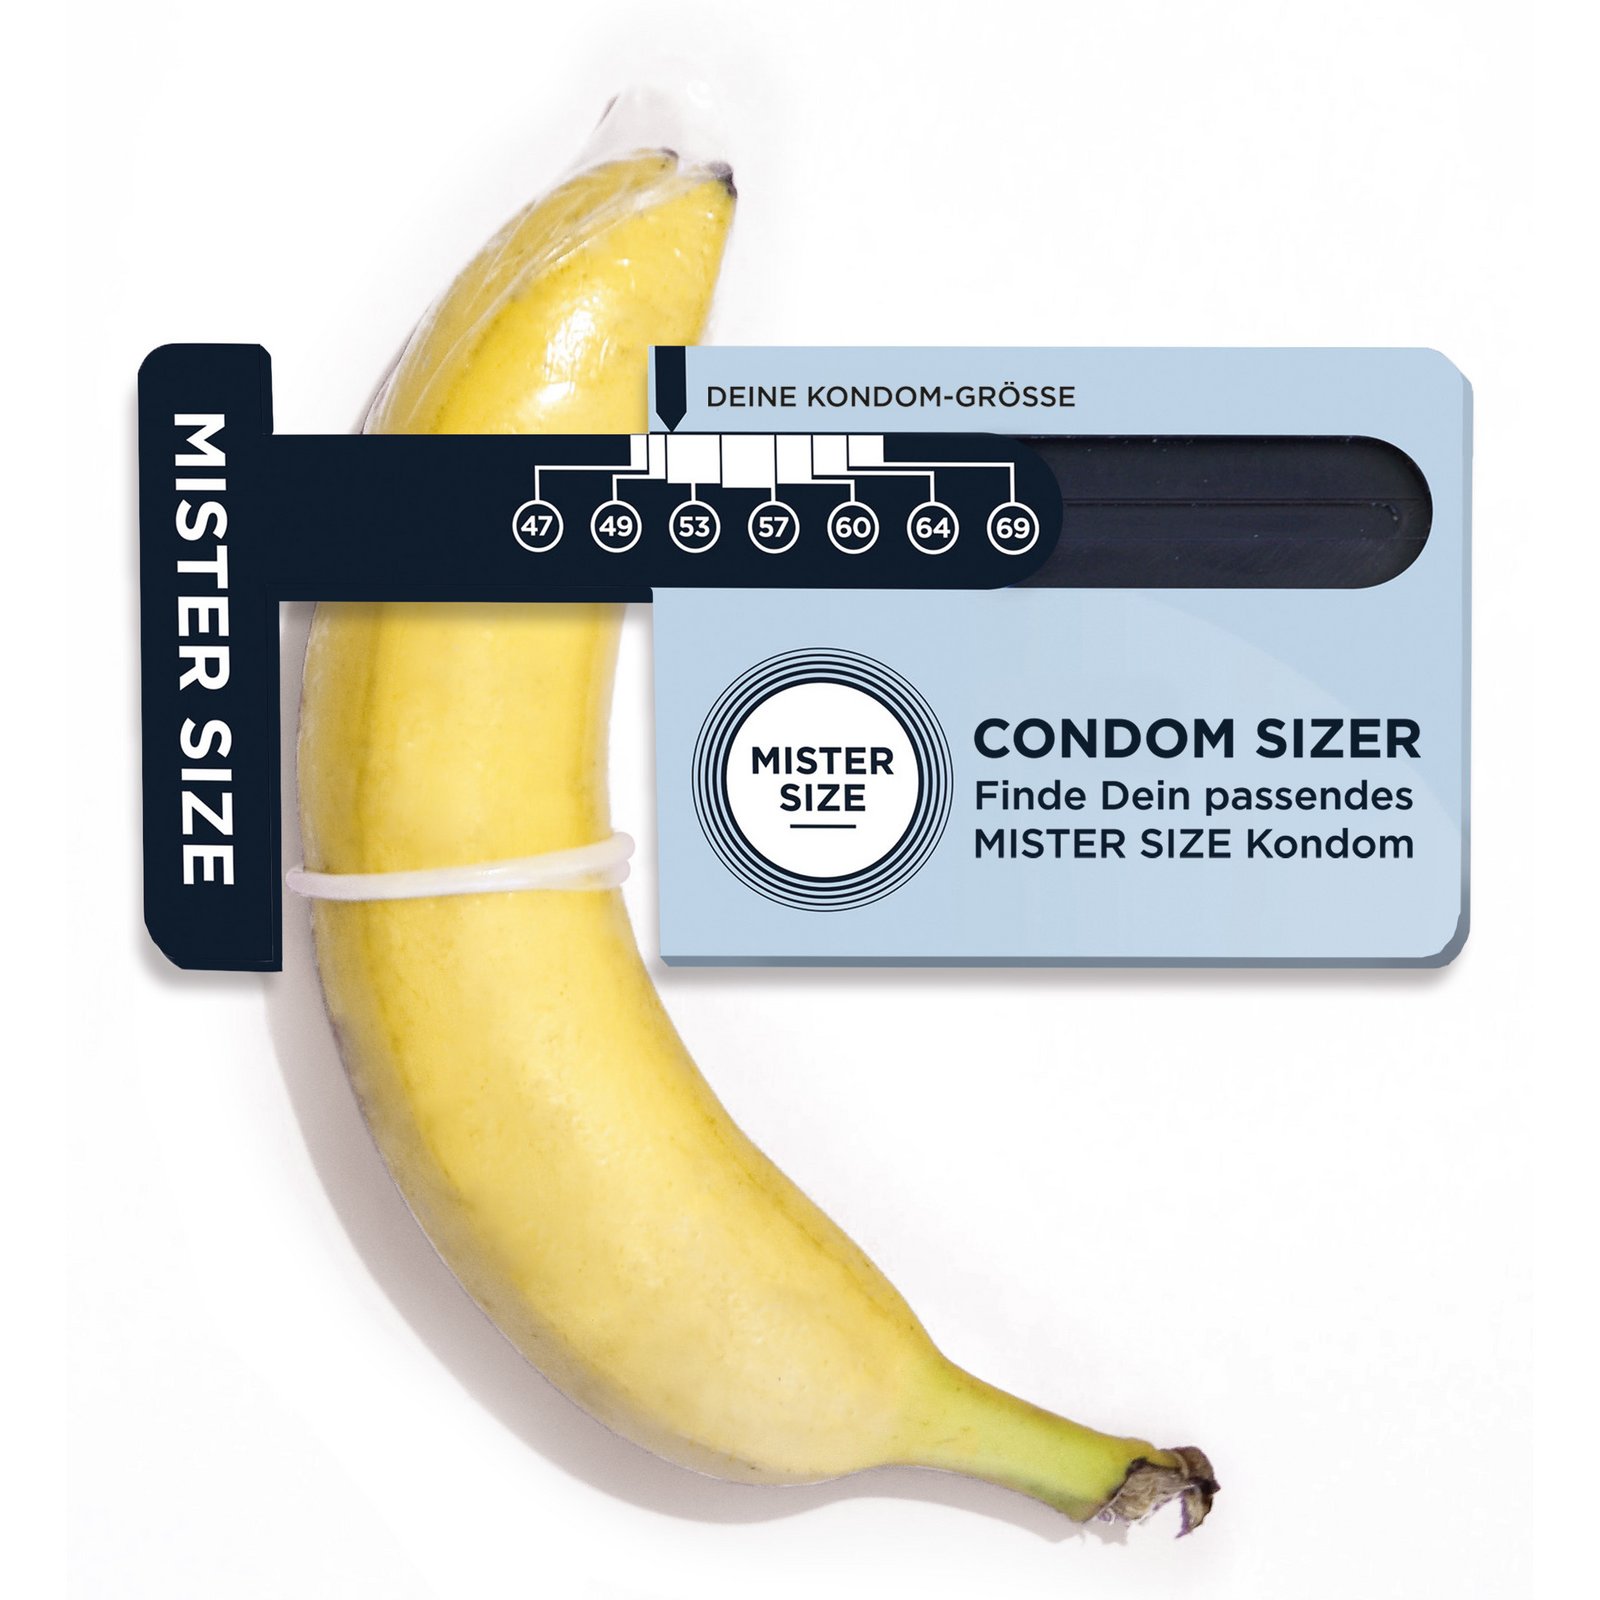 Condom Sizer - High quality measuring tool to determine the condom size.